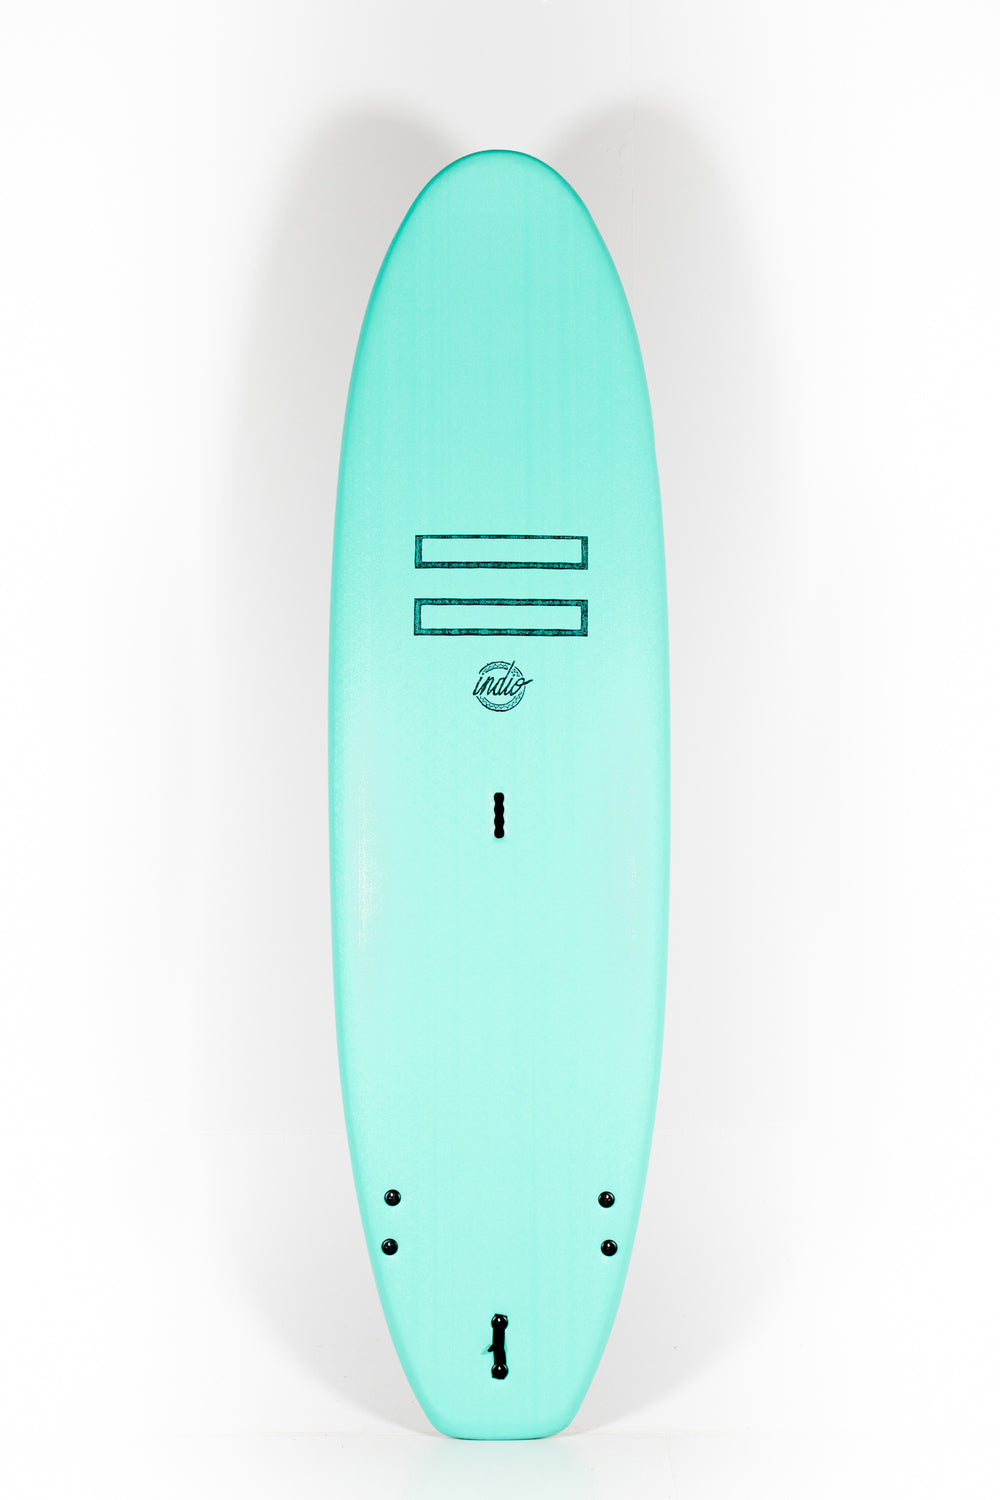 Pukas Surf Shop - INDIO - EASY GOING -  9'0